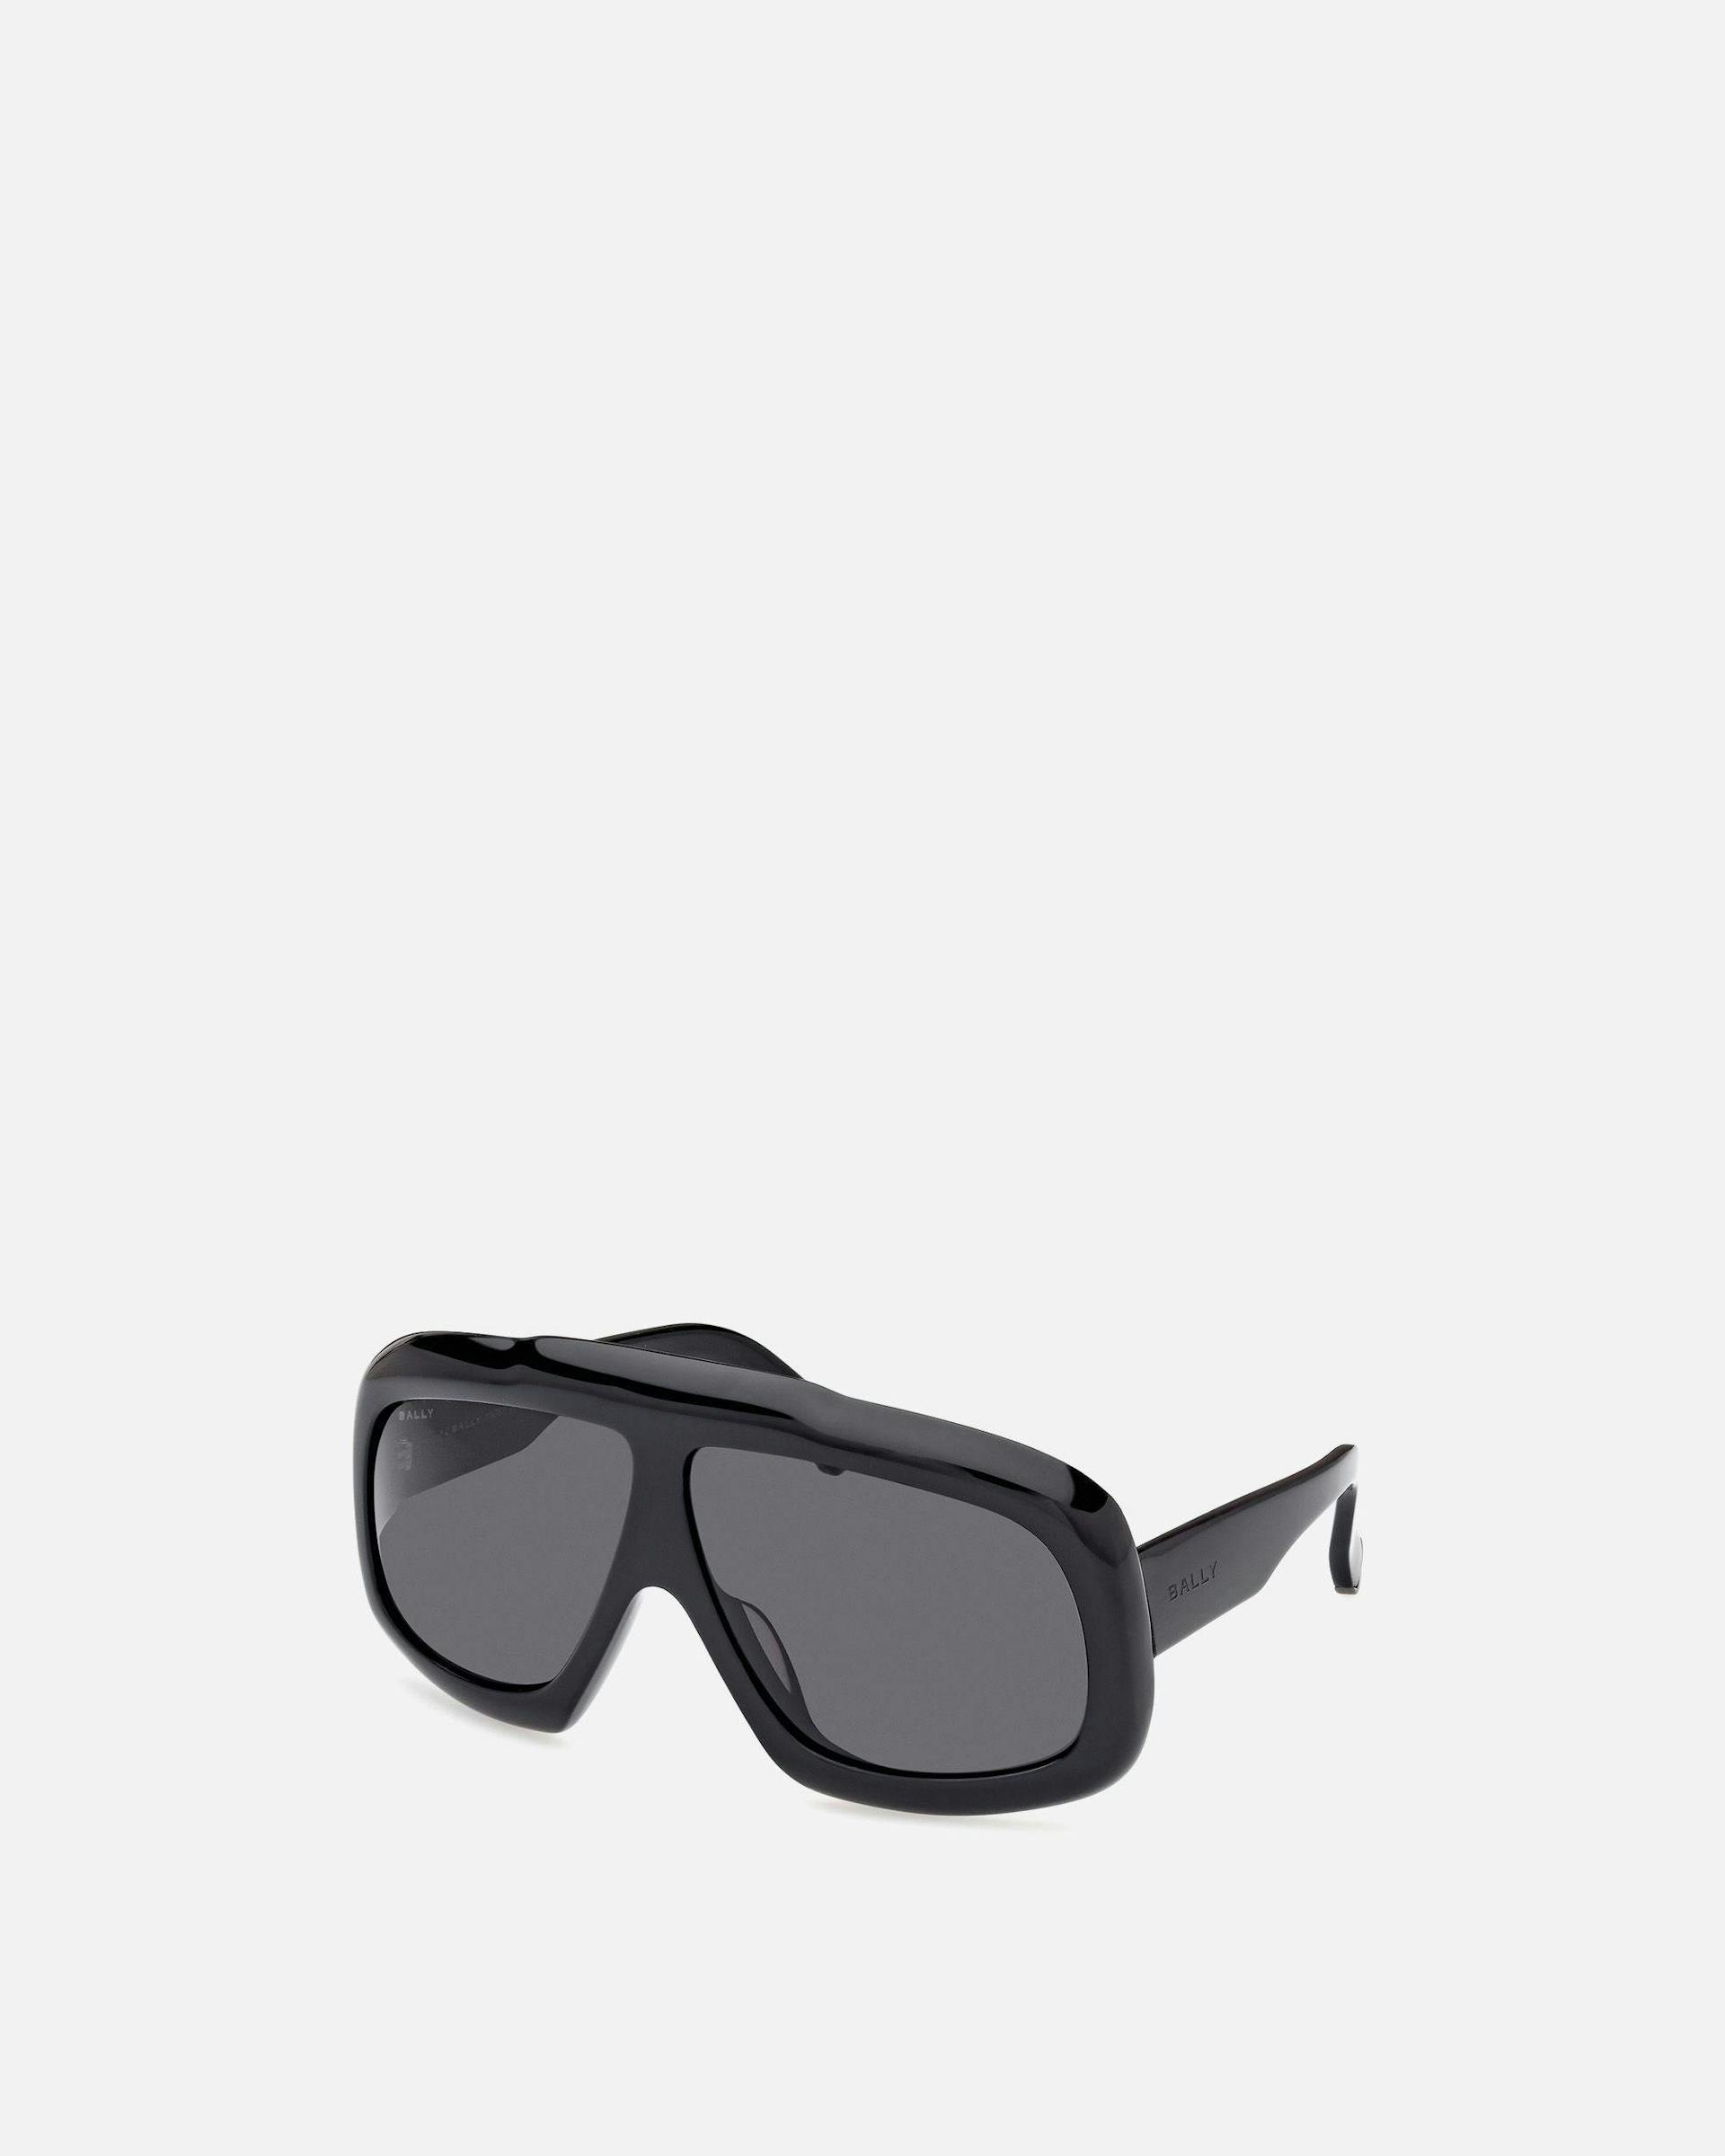 Eyger Acetate Sunglasses In Black and Smoke | Bally | Still Life 3/4 Side